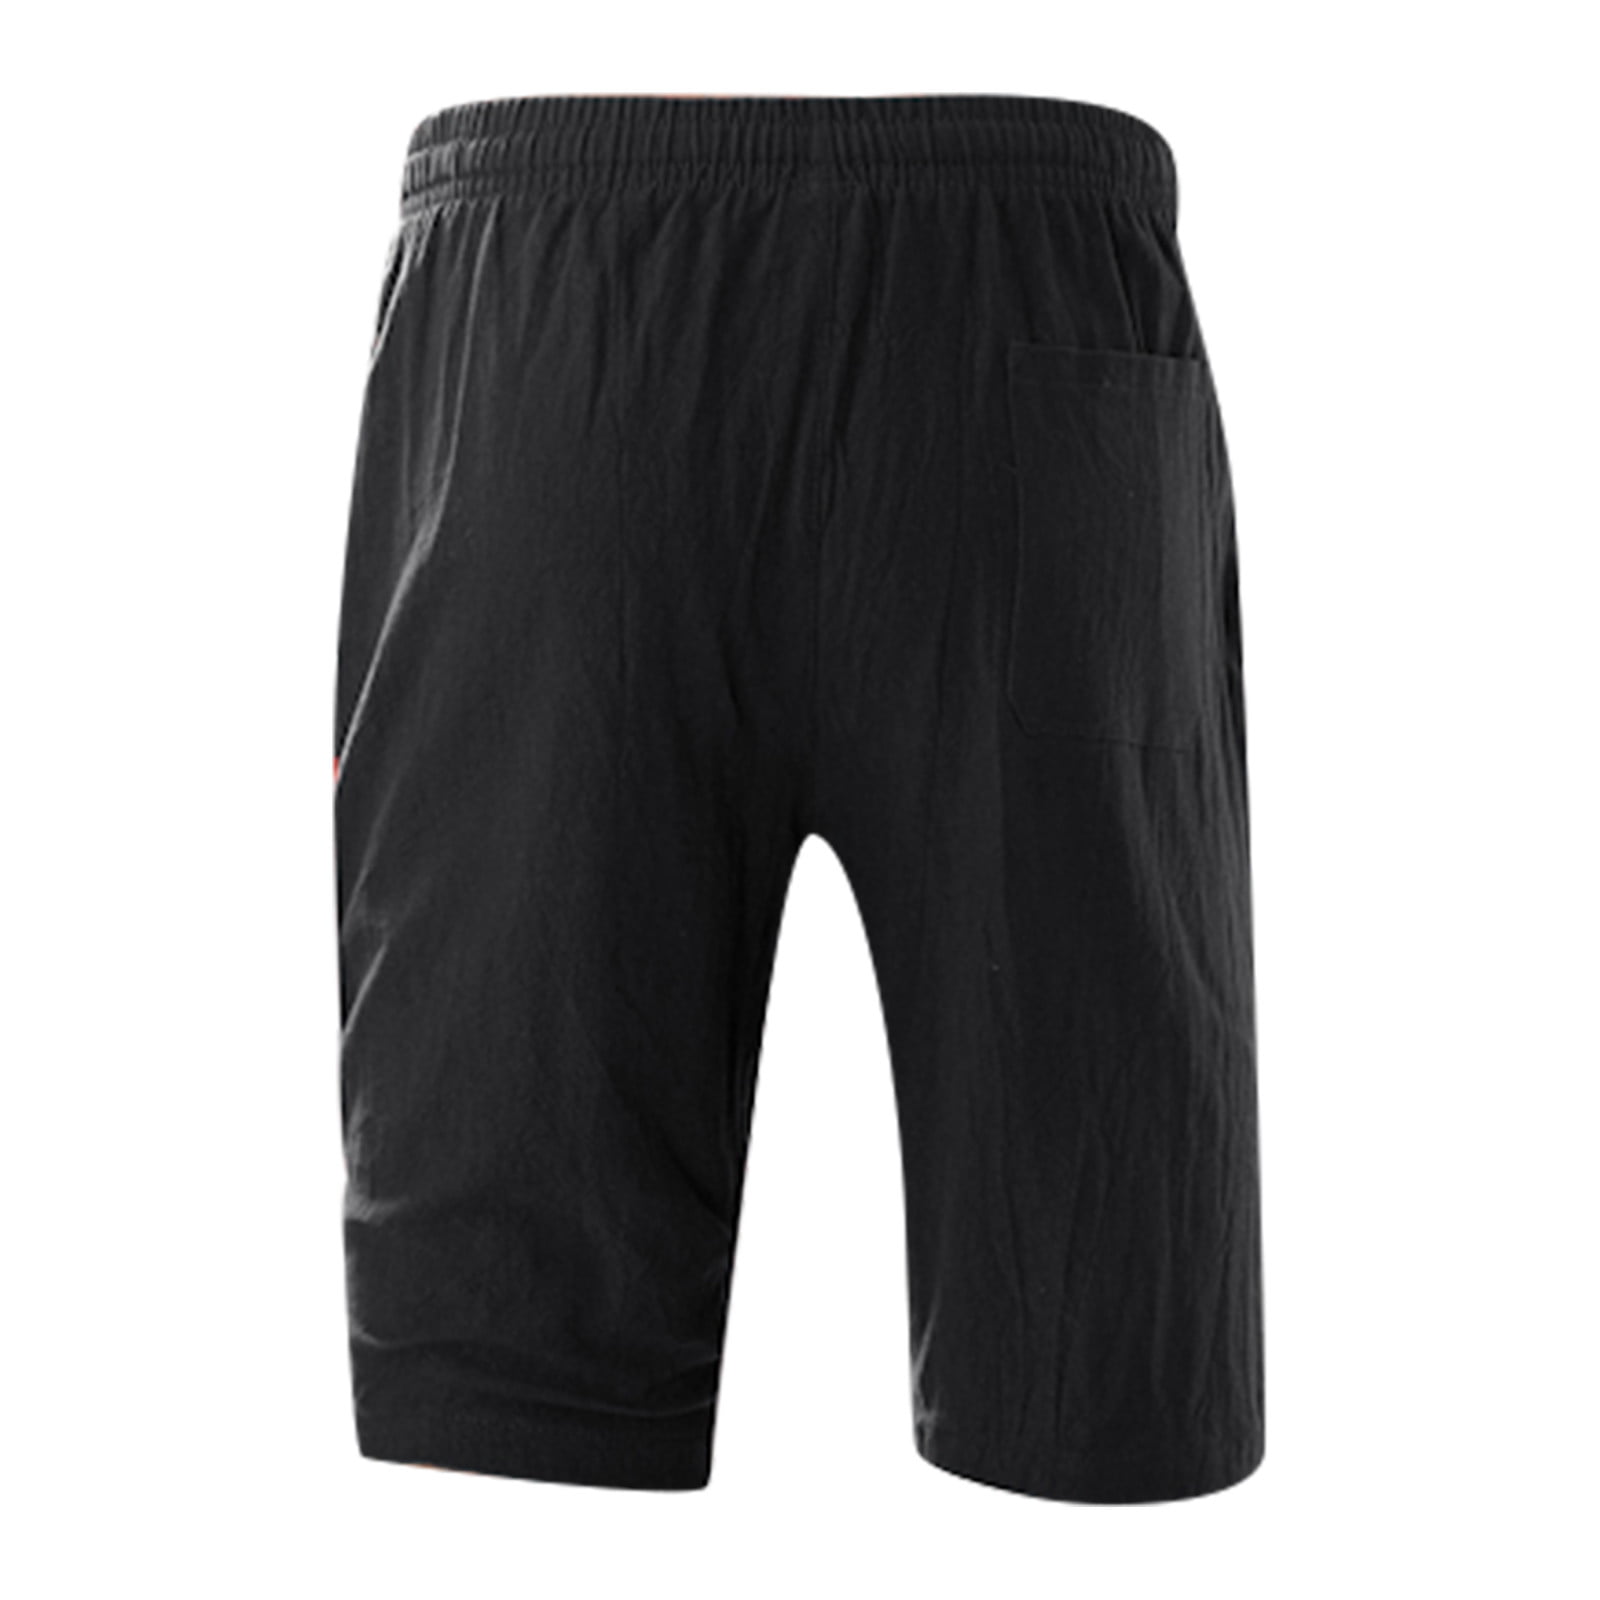 Clearance YOHOME Mens Shorts Fashion Casual Mid Waist Solid Color Pockets  Outdoor Shorts Pants Black XL 